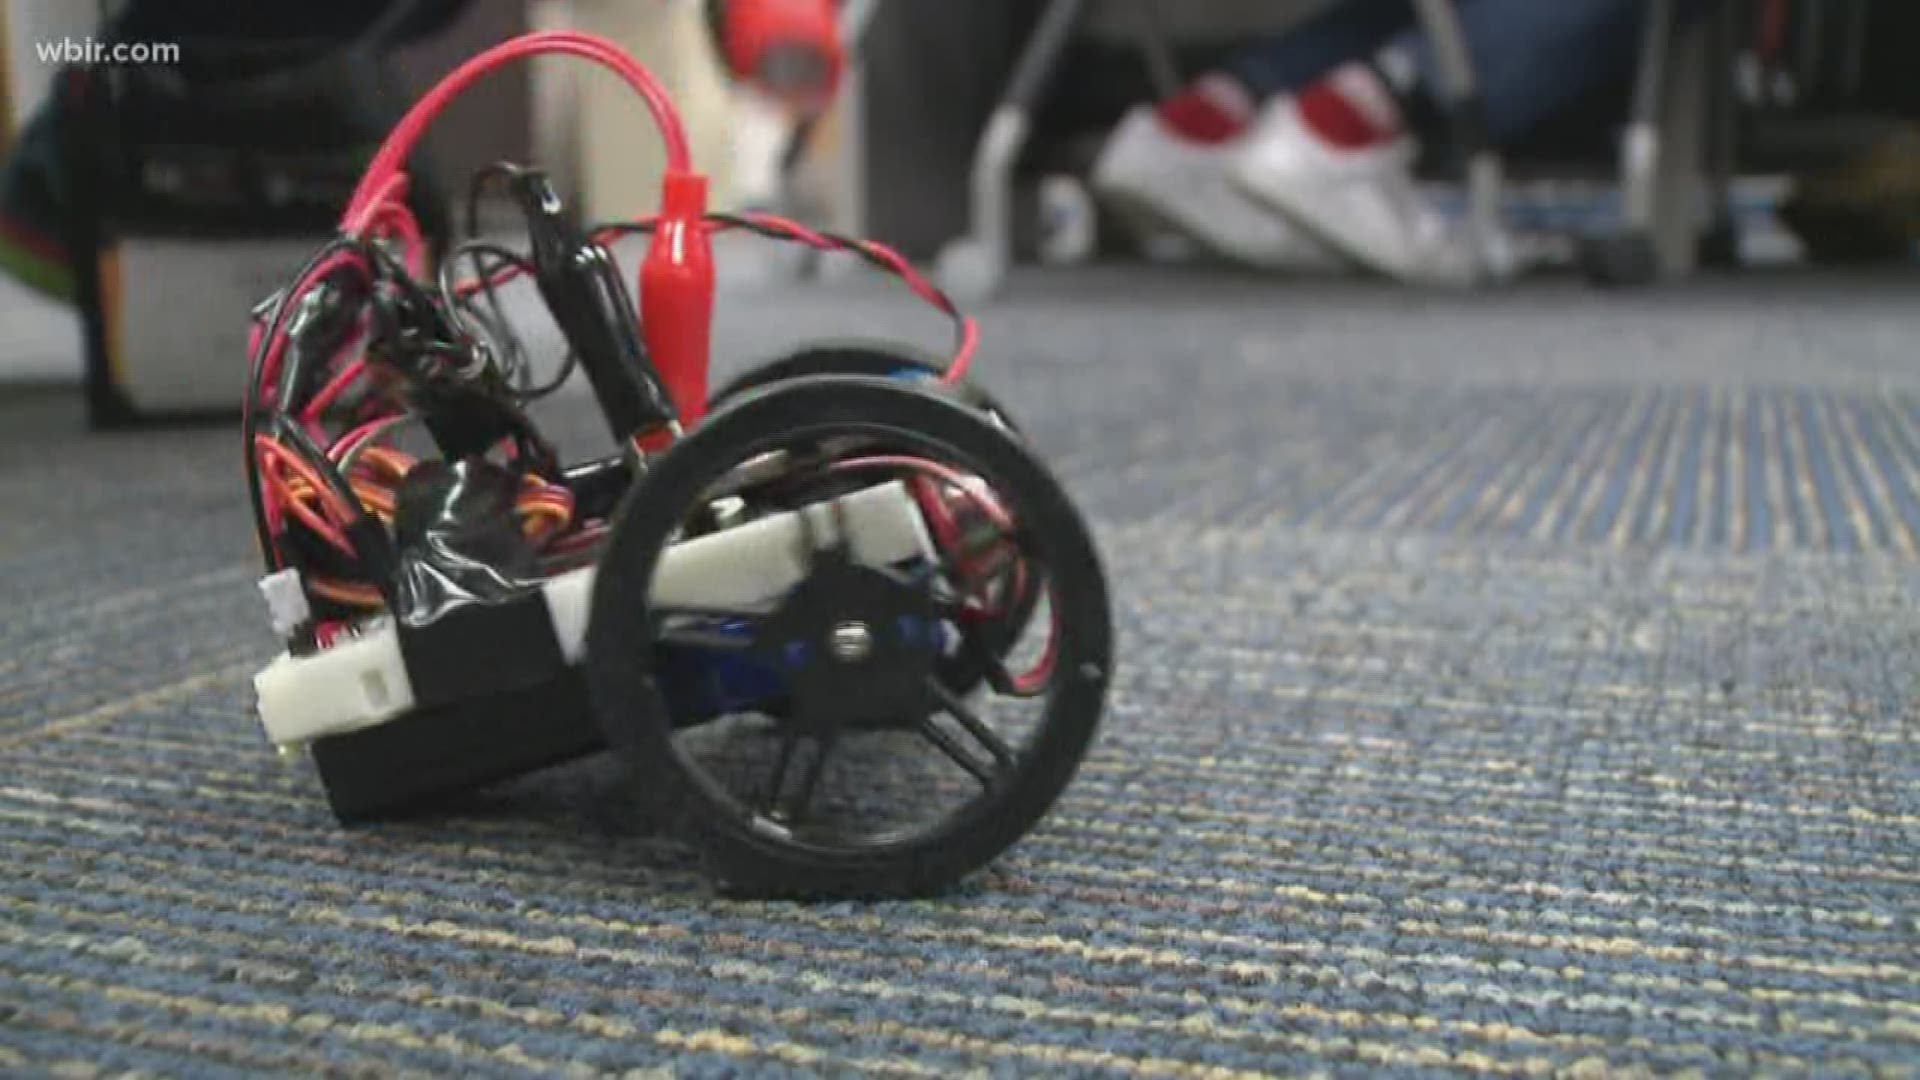 On Friday, we got a look at the robots they made this summer.